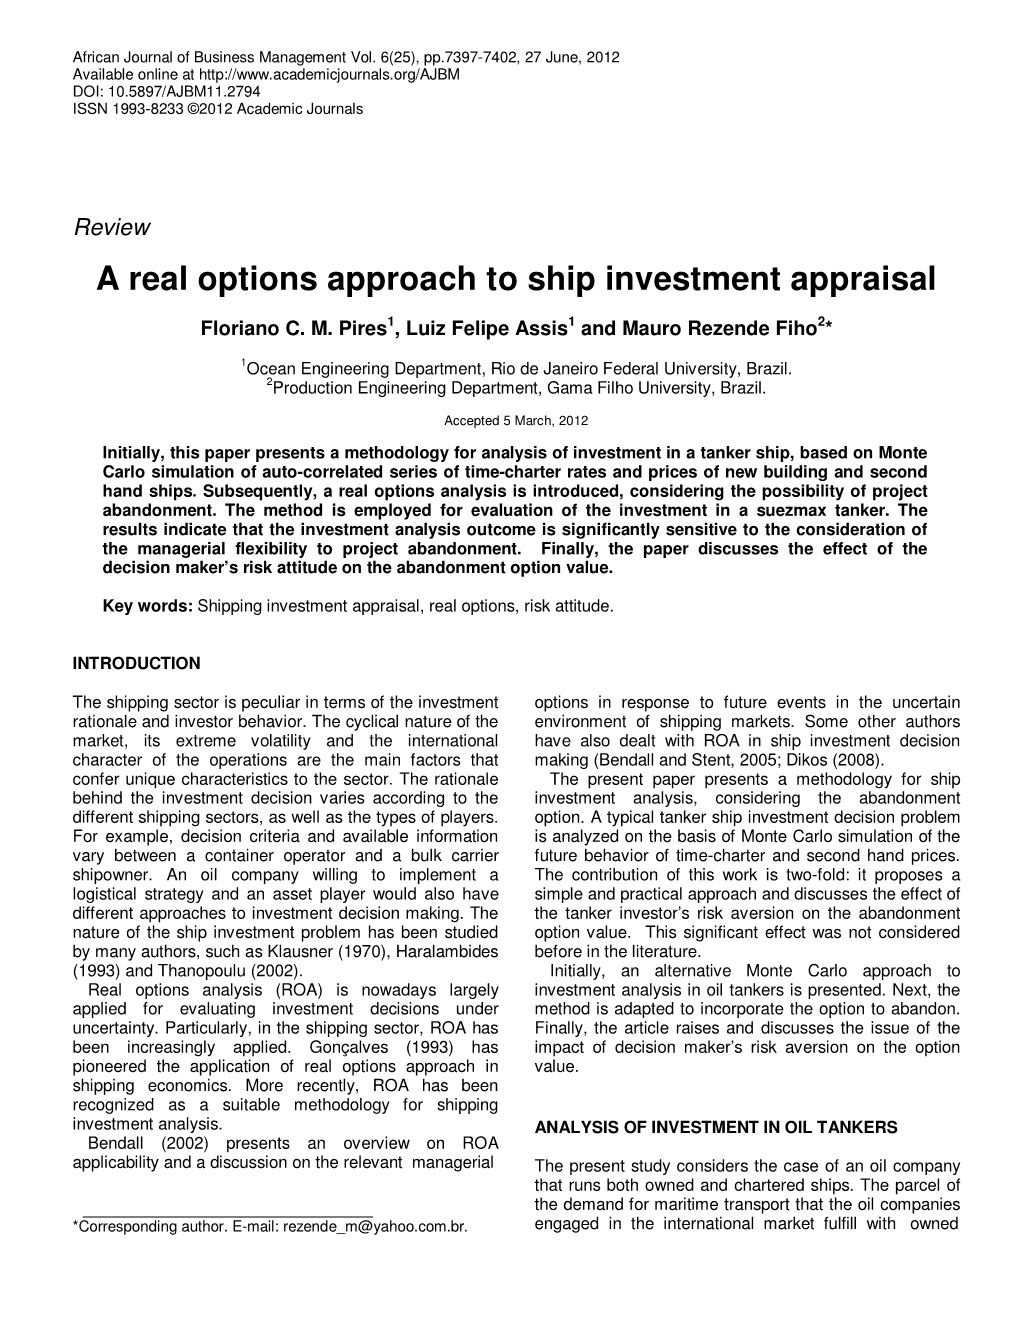 A Real Options Approach to Ship Investment Appraisal